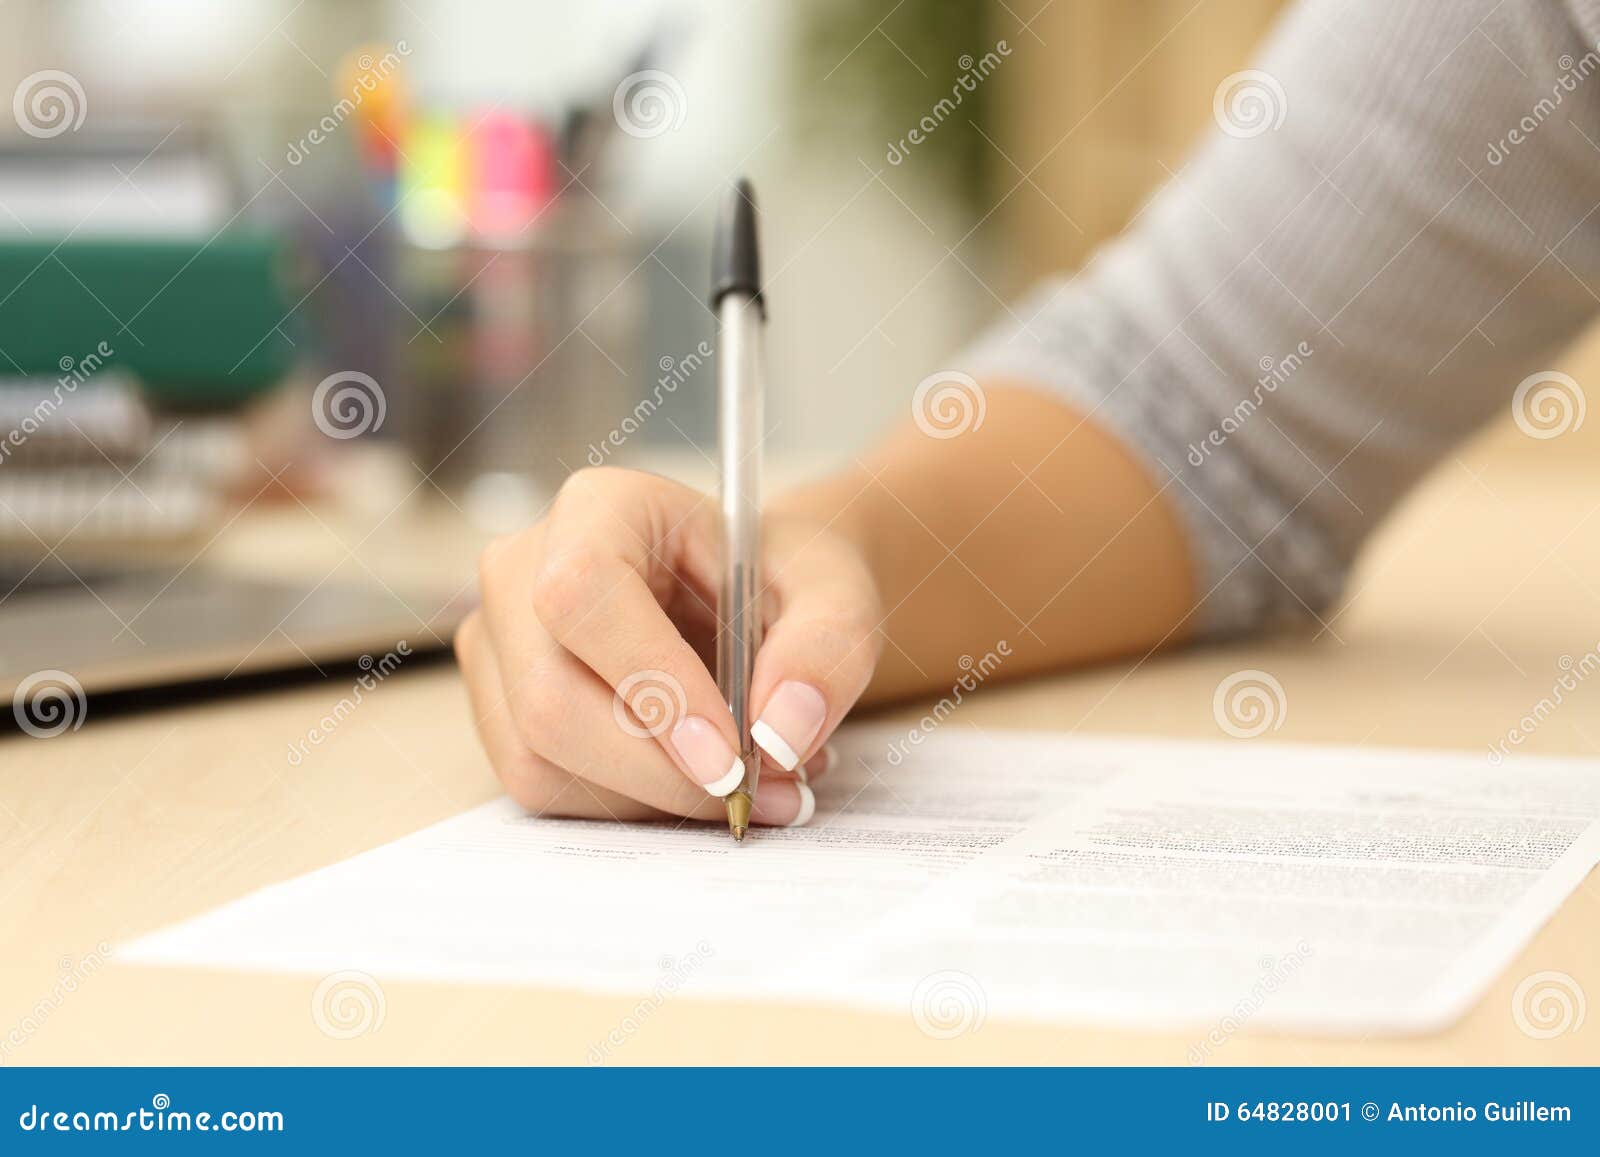 woman hand writing or signing in a document